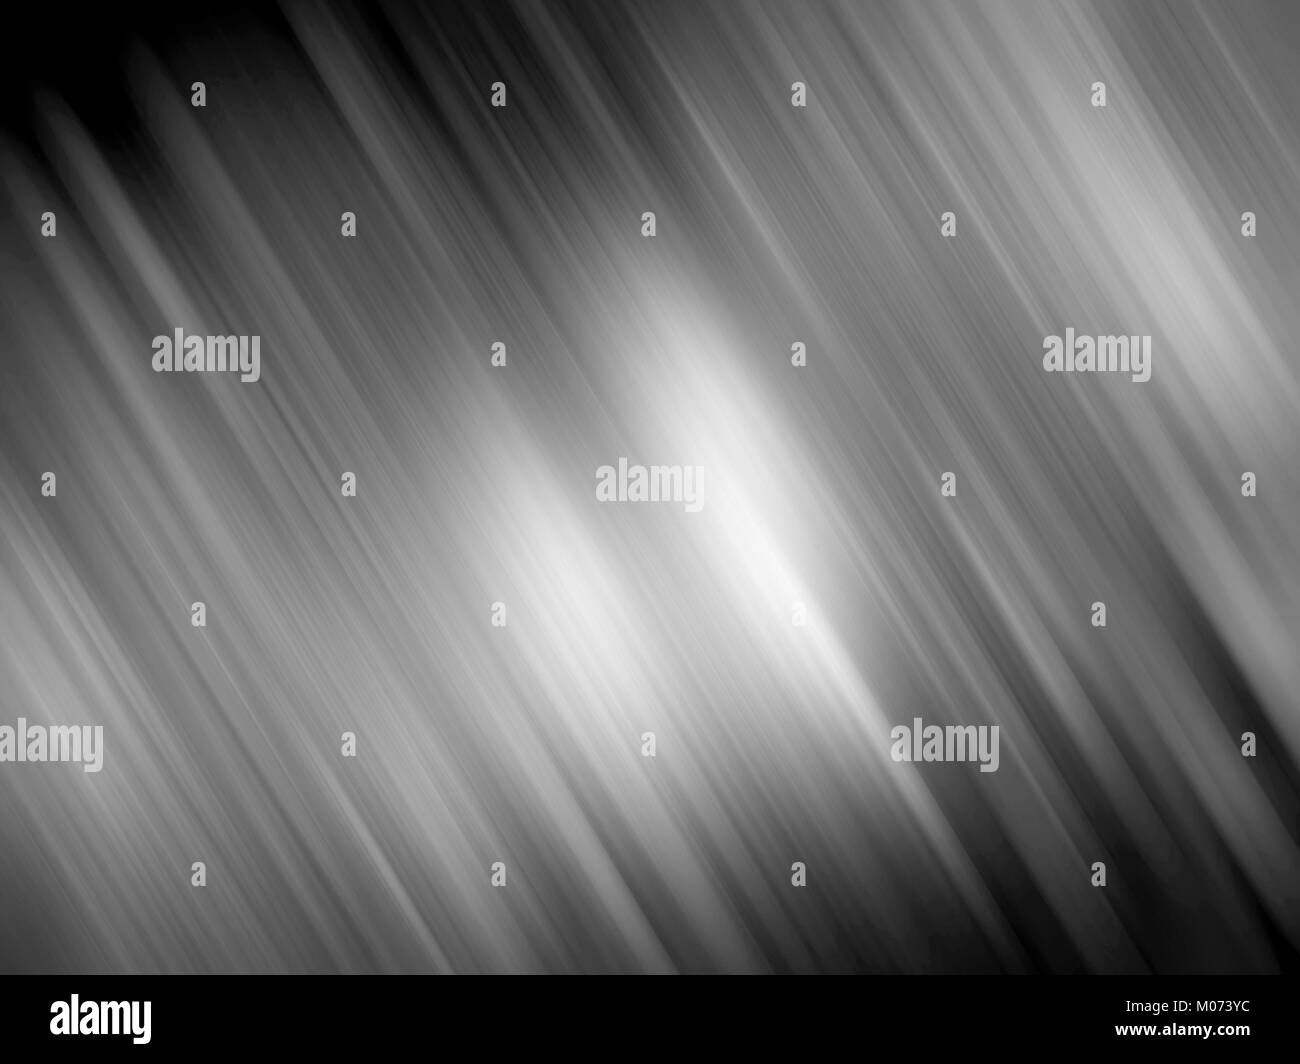 Glowing blurred motion fractal, black and white texture, computer generated abstract background, 3D rendering Stock Photo